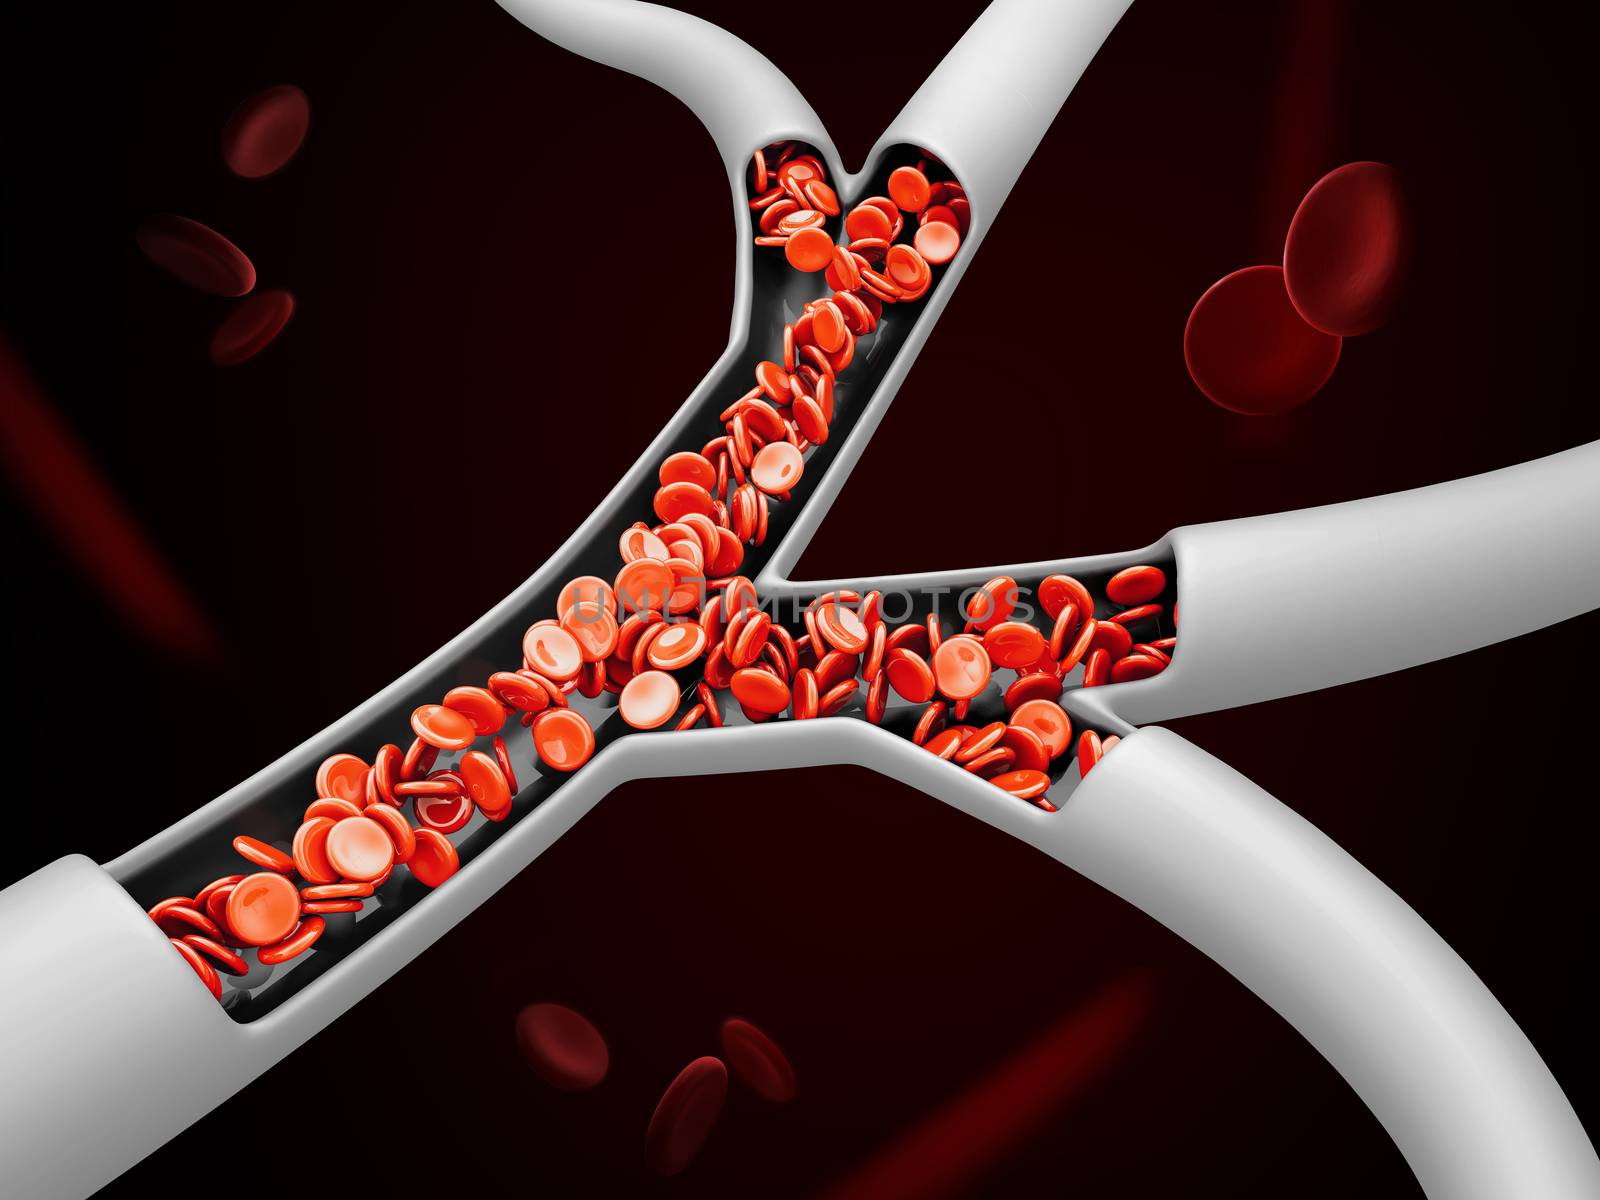 3d Illustration of red blood cells in vein, clipping path included.